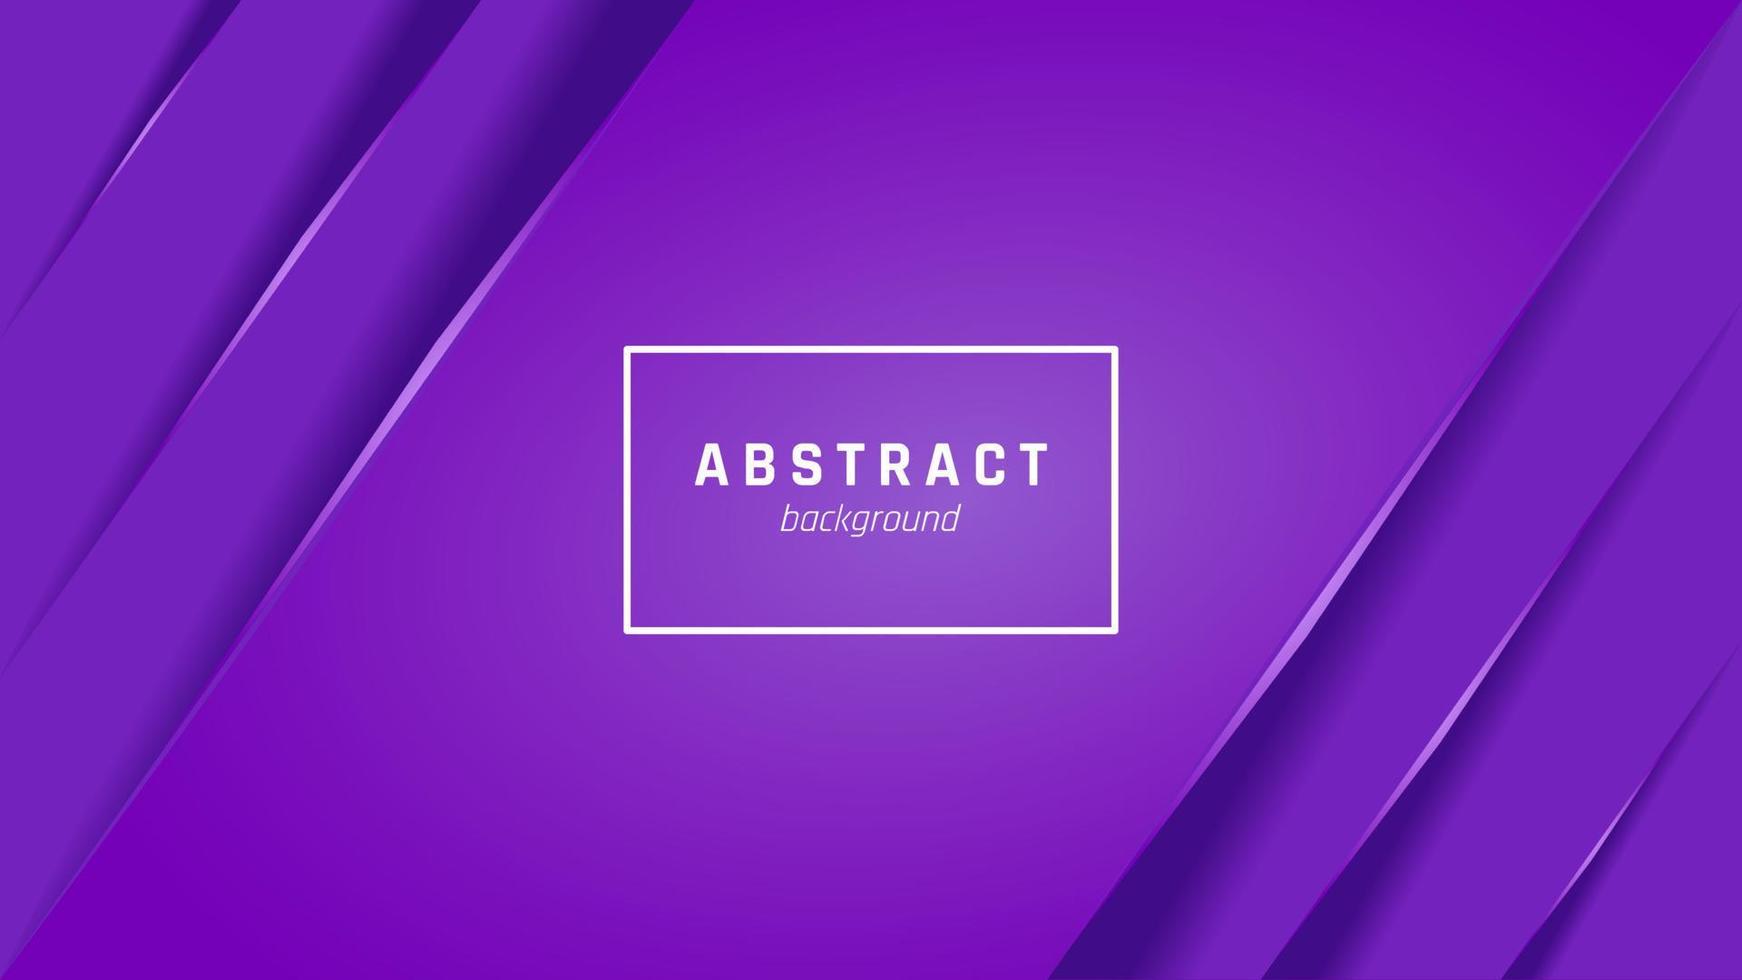 Abstract purple violet modern dinamic shiny minimalist background vector